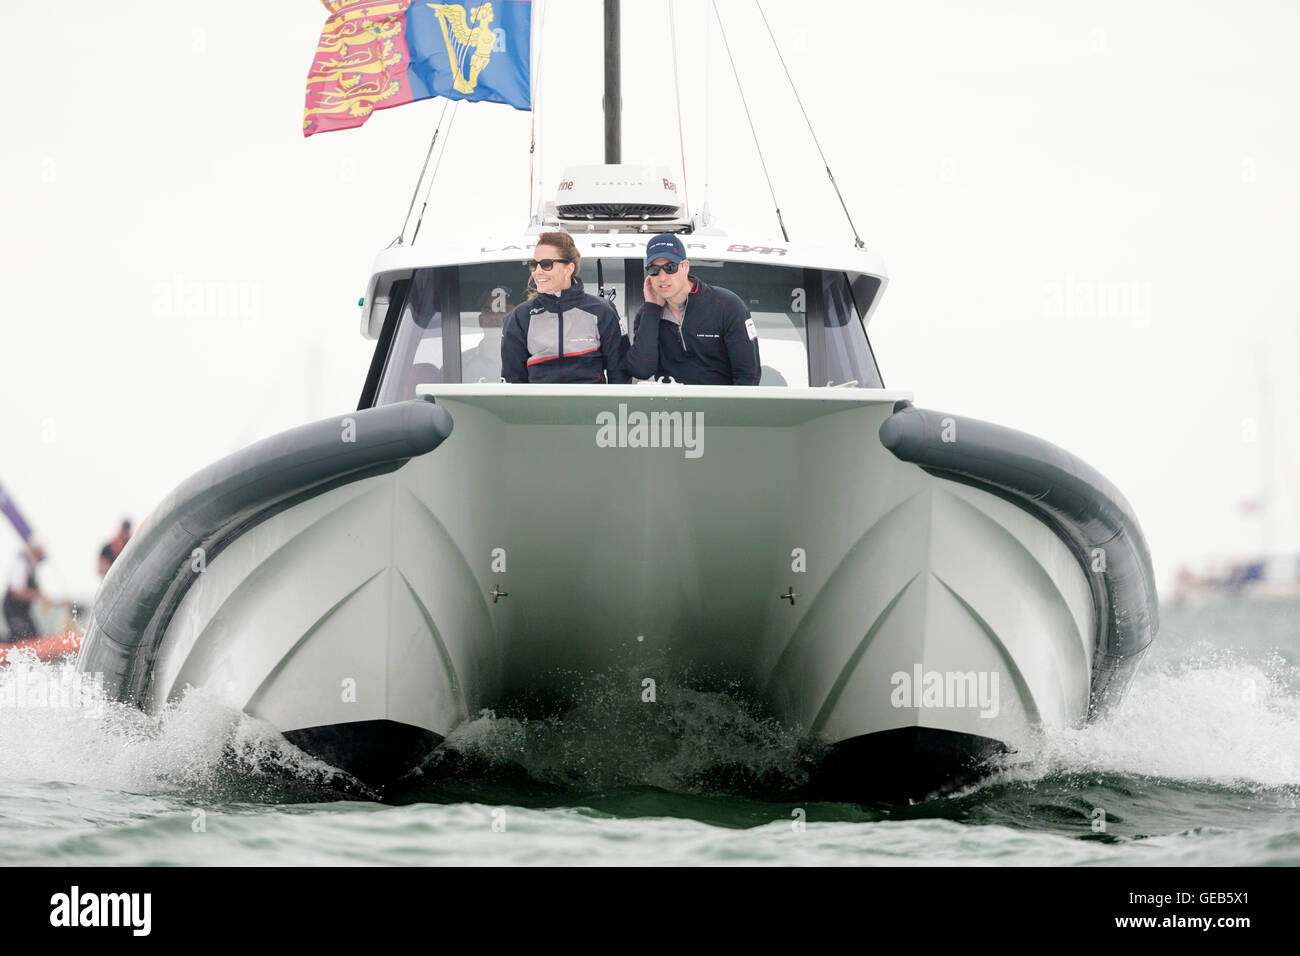 The Duke and Duchess of Cambridge watch Sir Ben Ainslie's Land Rover BAR team racing from a chase boat during day four of the America's Cup World Series Portsmouth event. Stock Photo